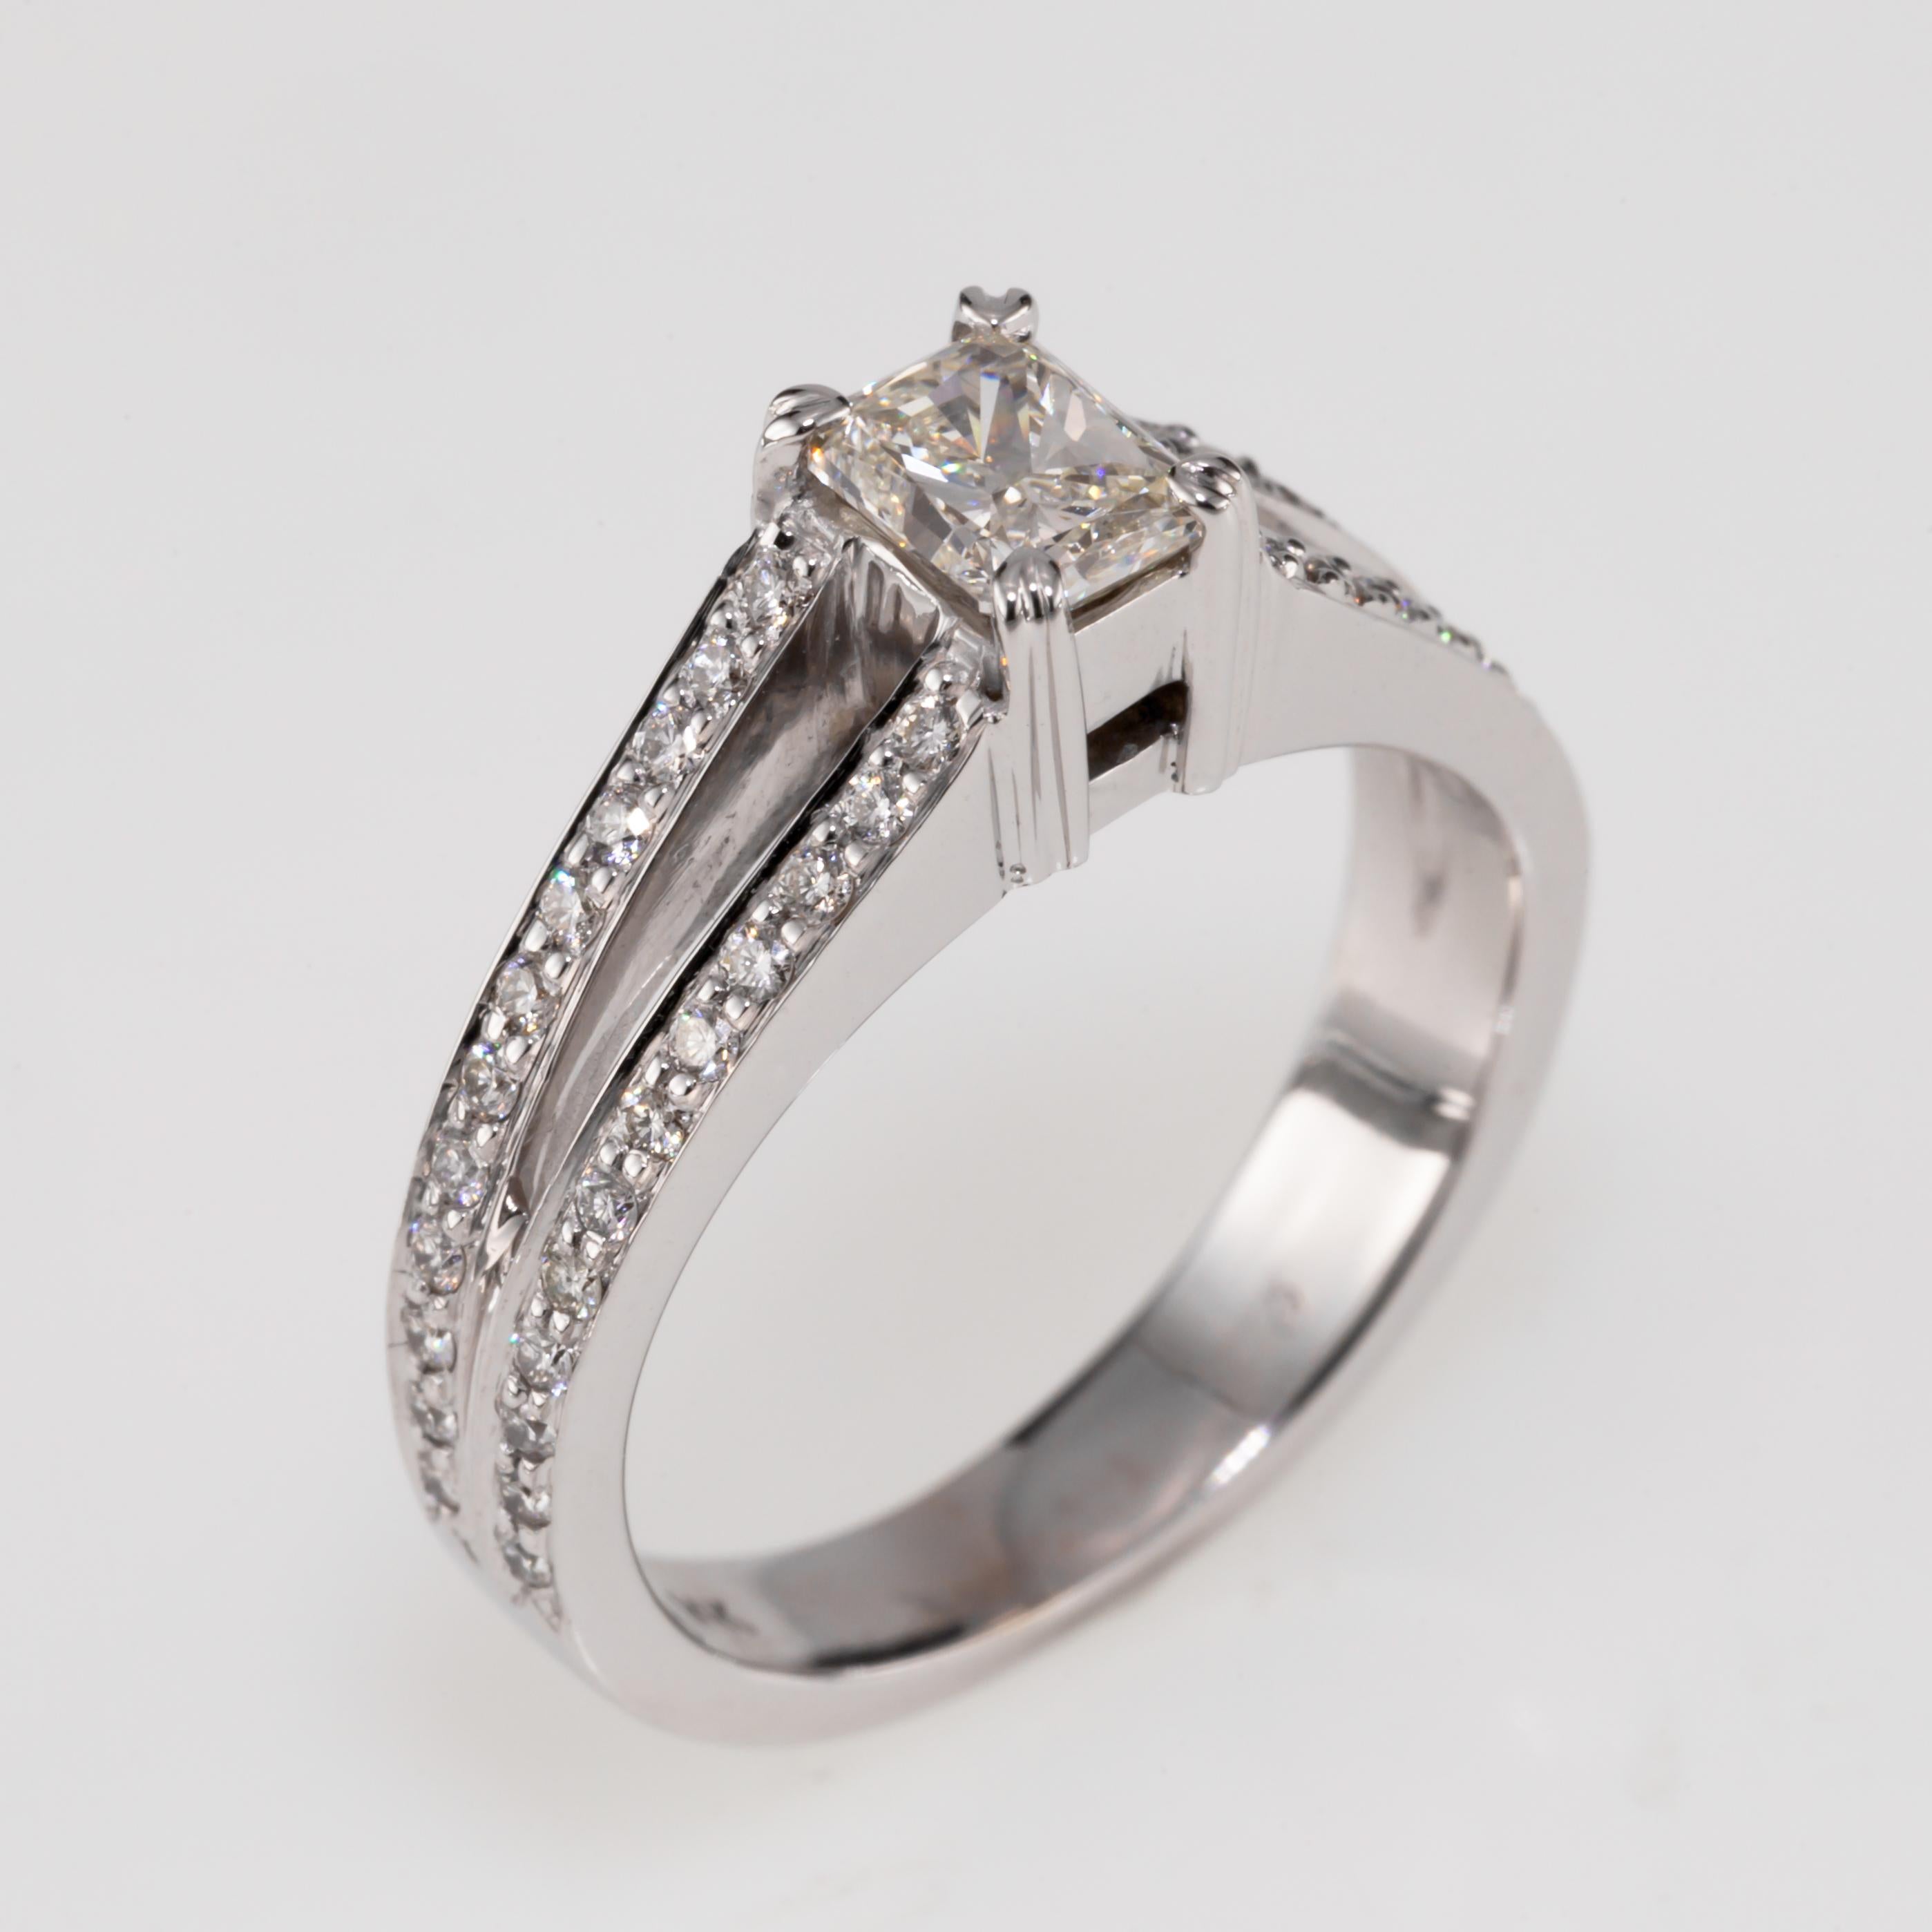 0.53 Carat Radiant Diamond Solitaire Ring with Accent Stones in White Gold 7